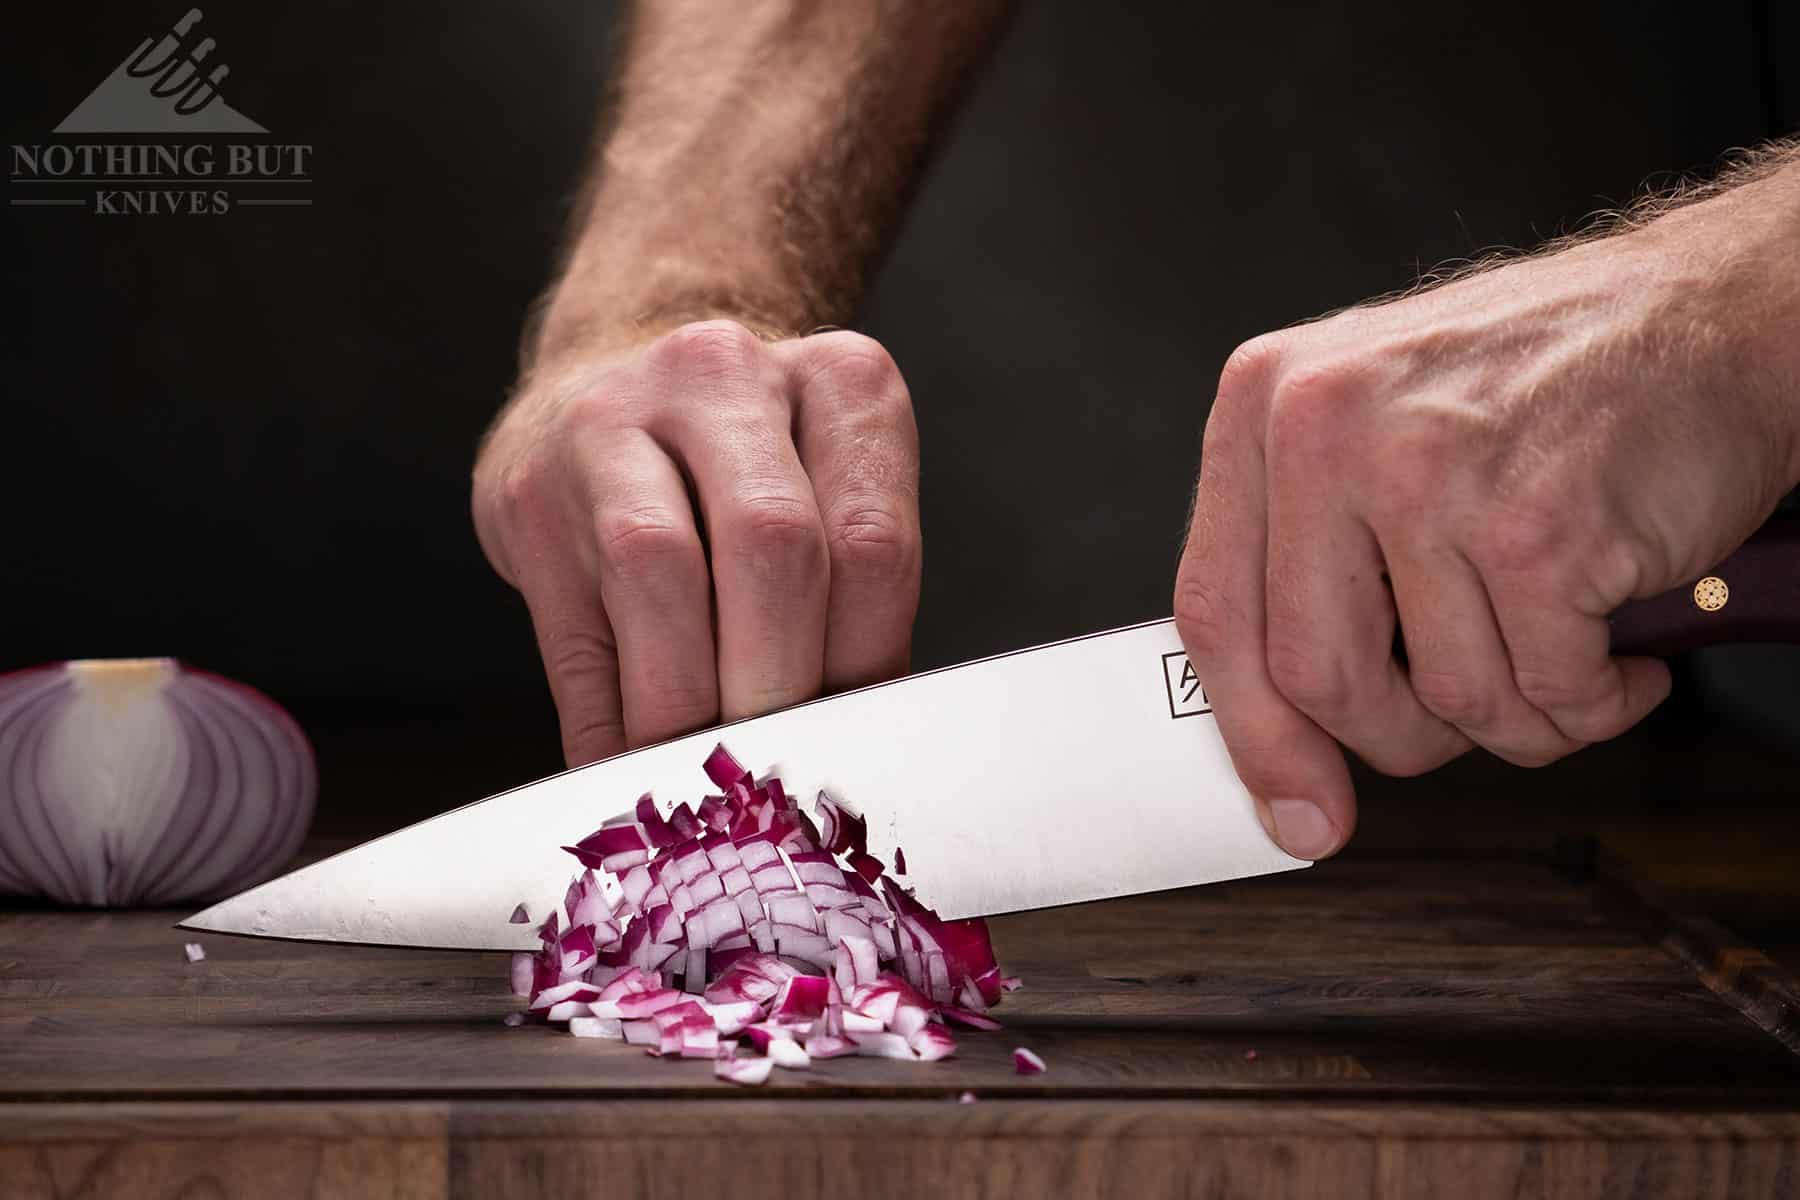 This knife was capable of dicing very small pieces from an onion. 